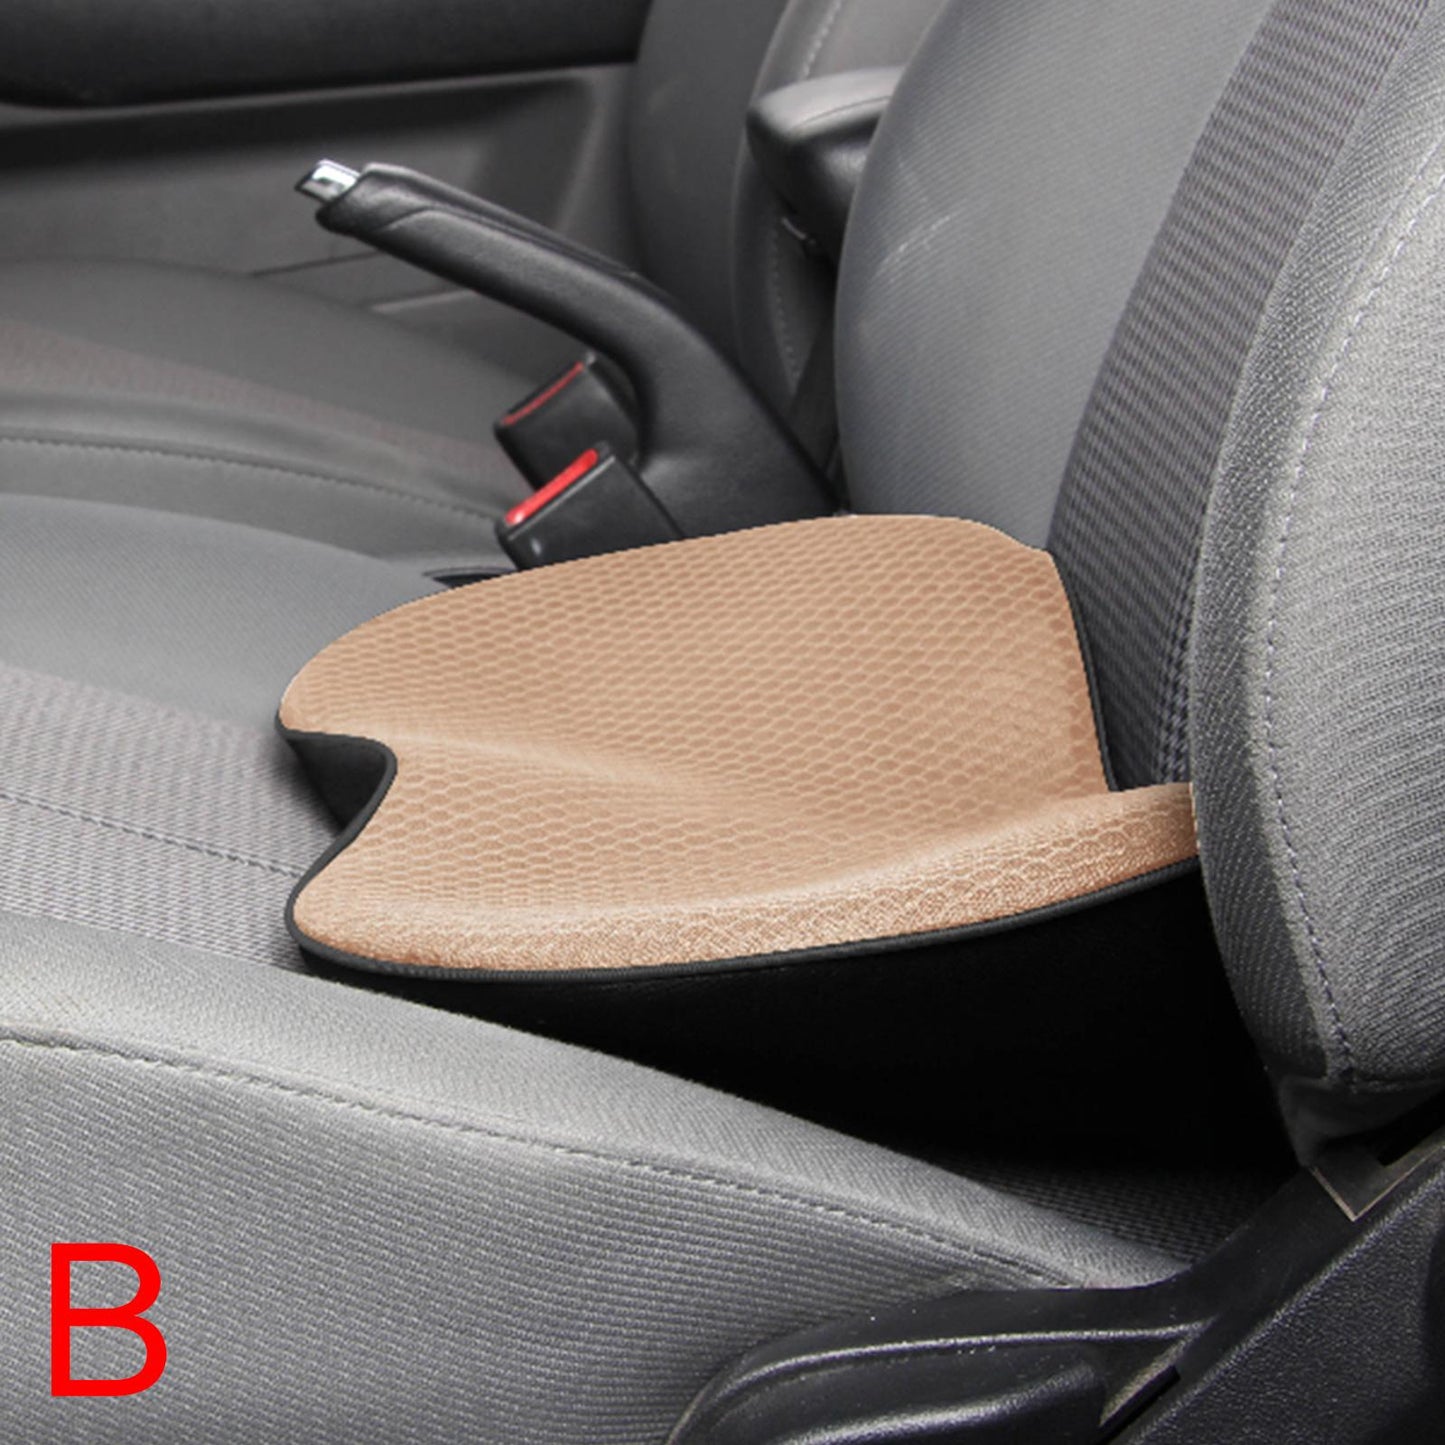 1 PCS SEAT Cushion For Car Seat Driver，Car Seat Cushions For Short People  $66.10 - PicClick AU